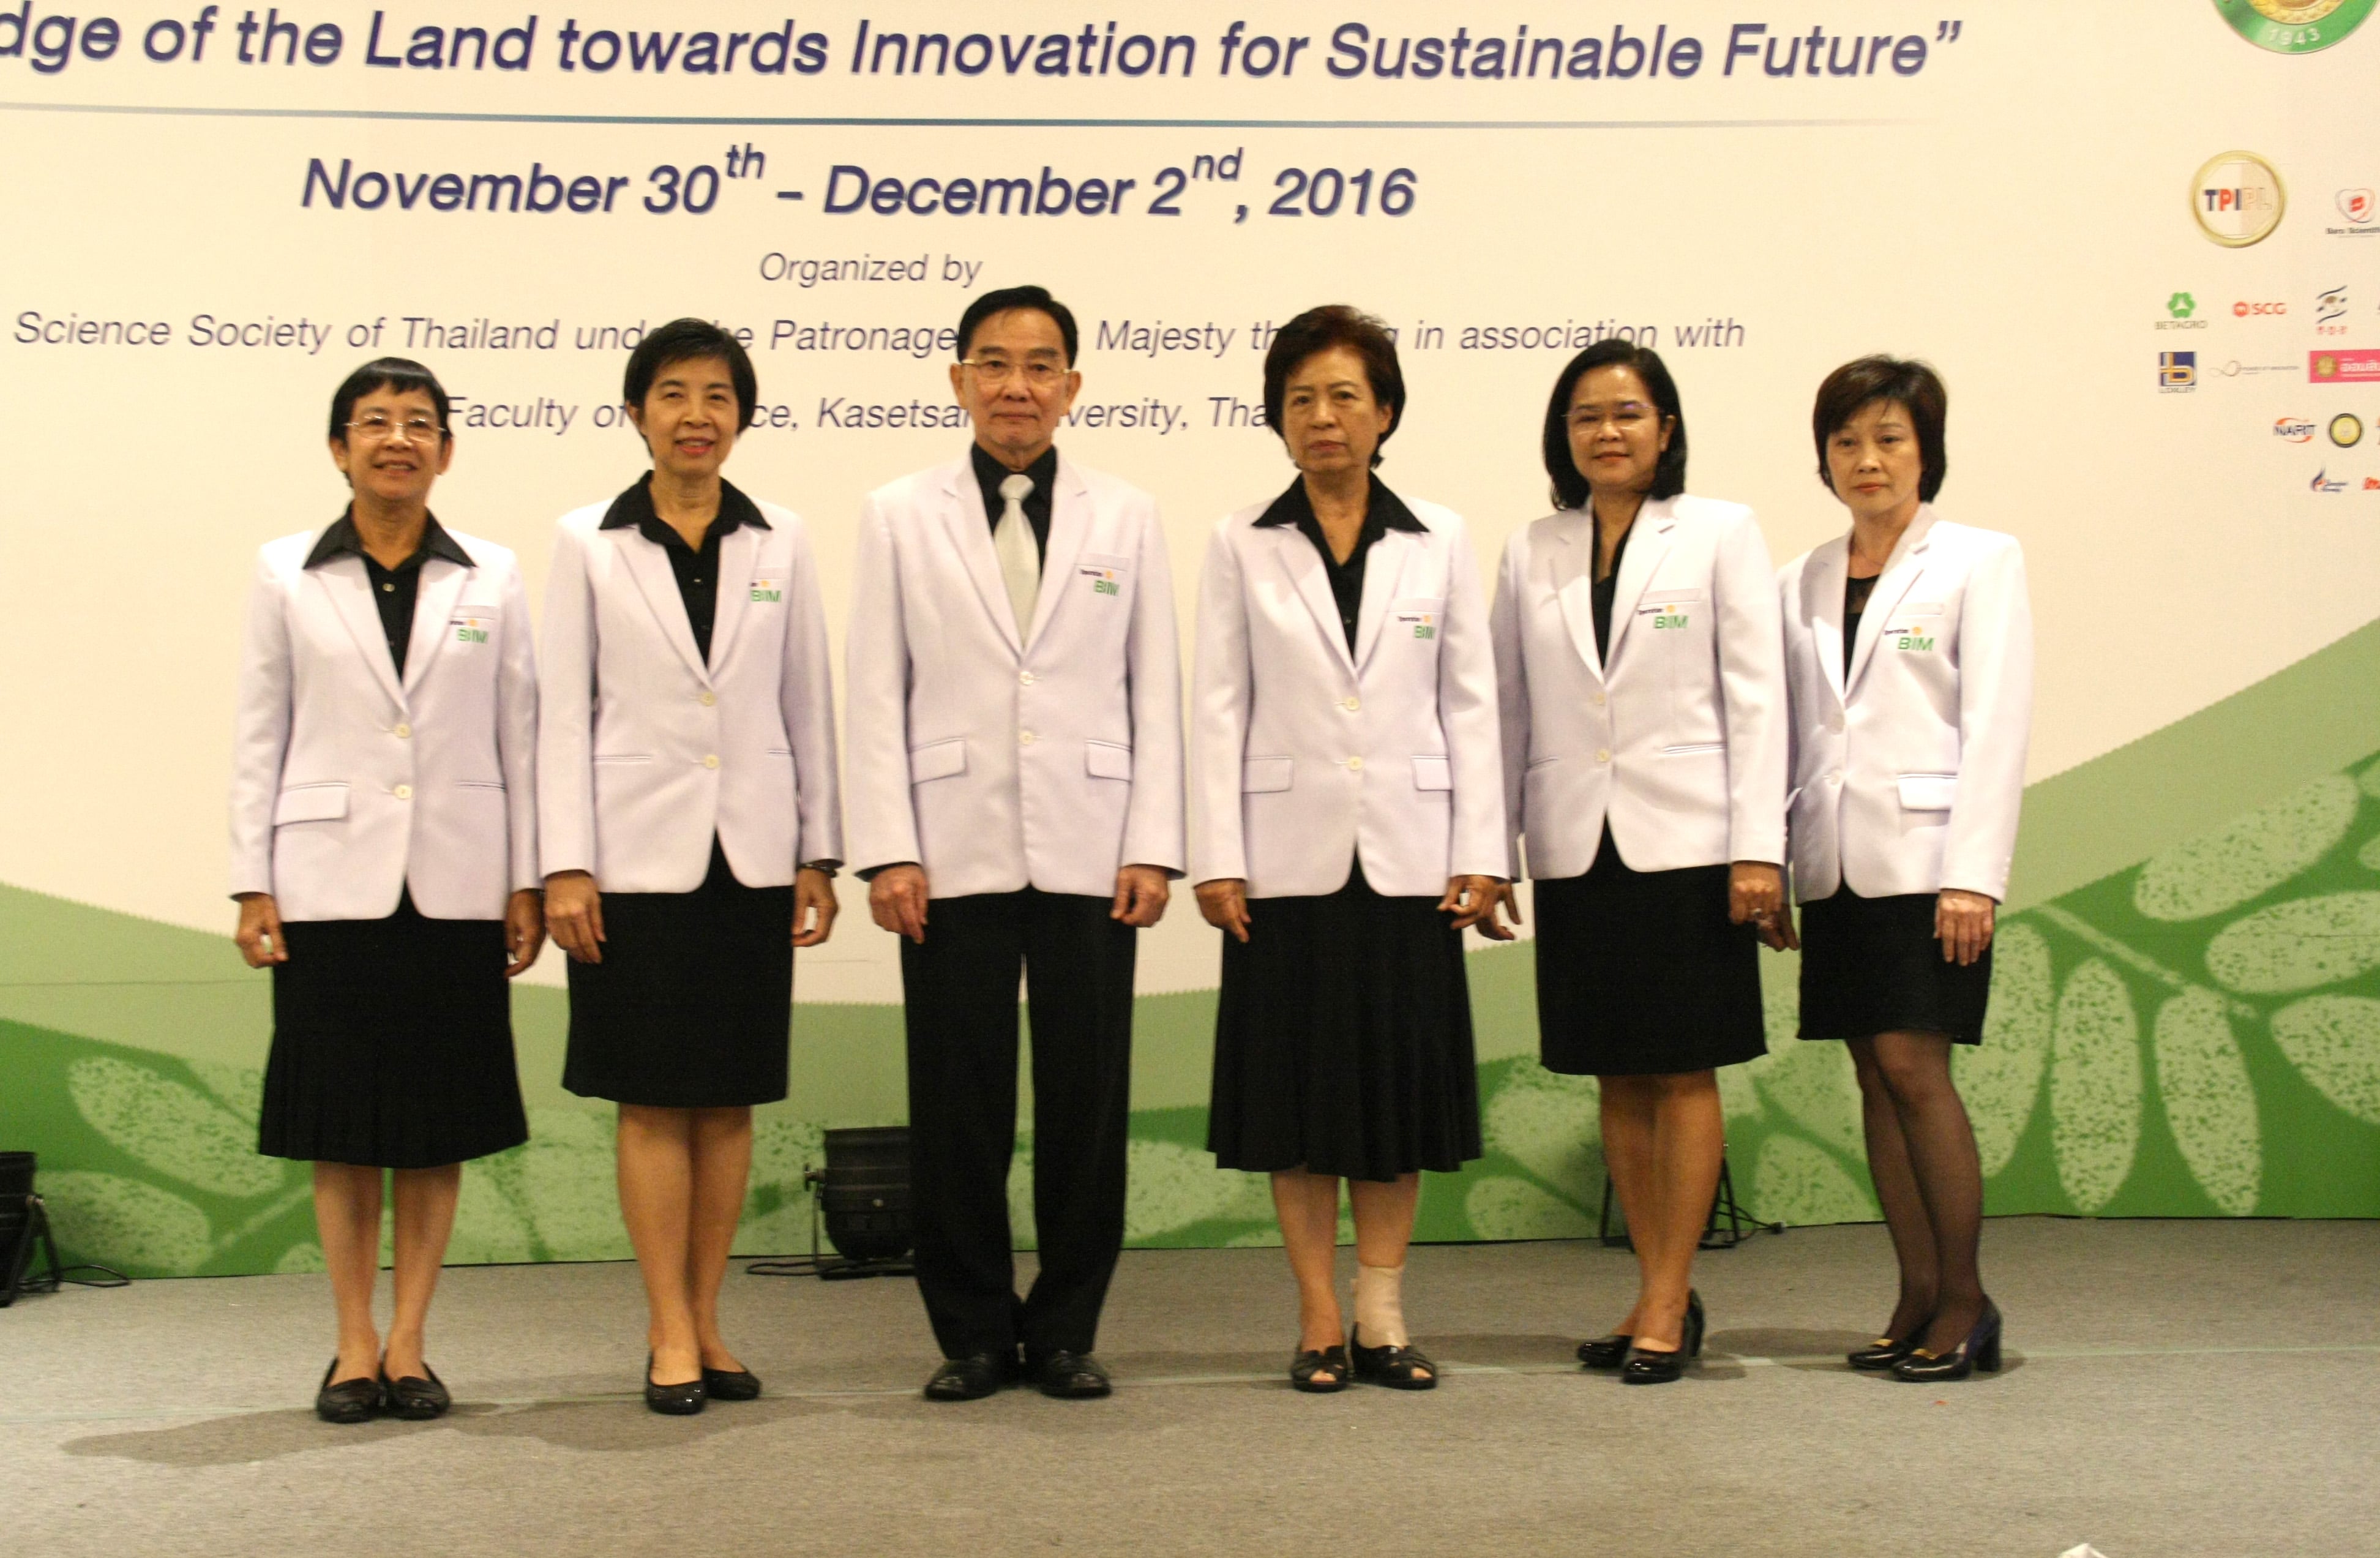 The 42nd Congress on Science and Technology of Thailand “Knowledge of the Land towards Innovation for Sustainable Future”